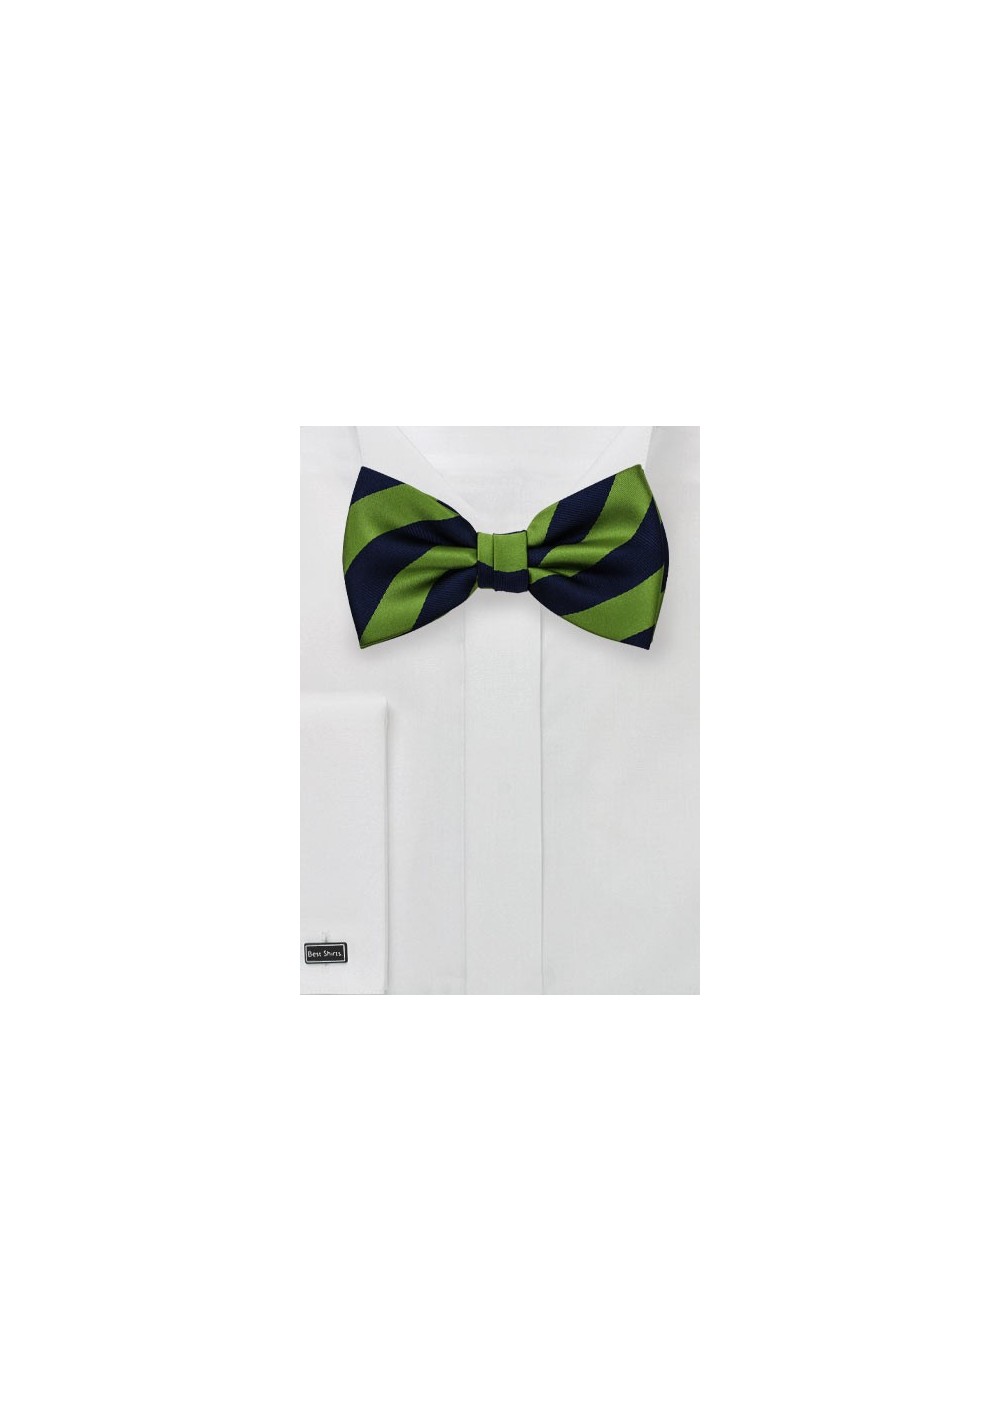 Classic Striped Bow Tie in Navy and Green